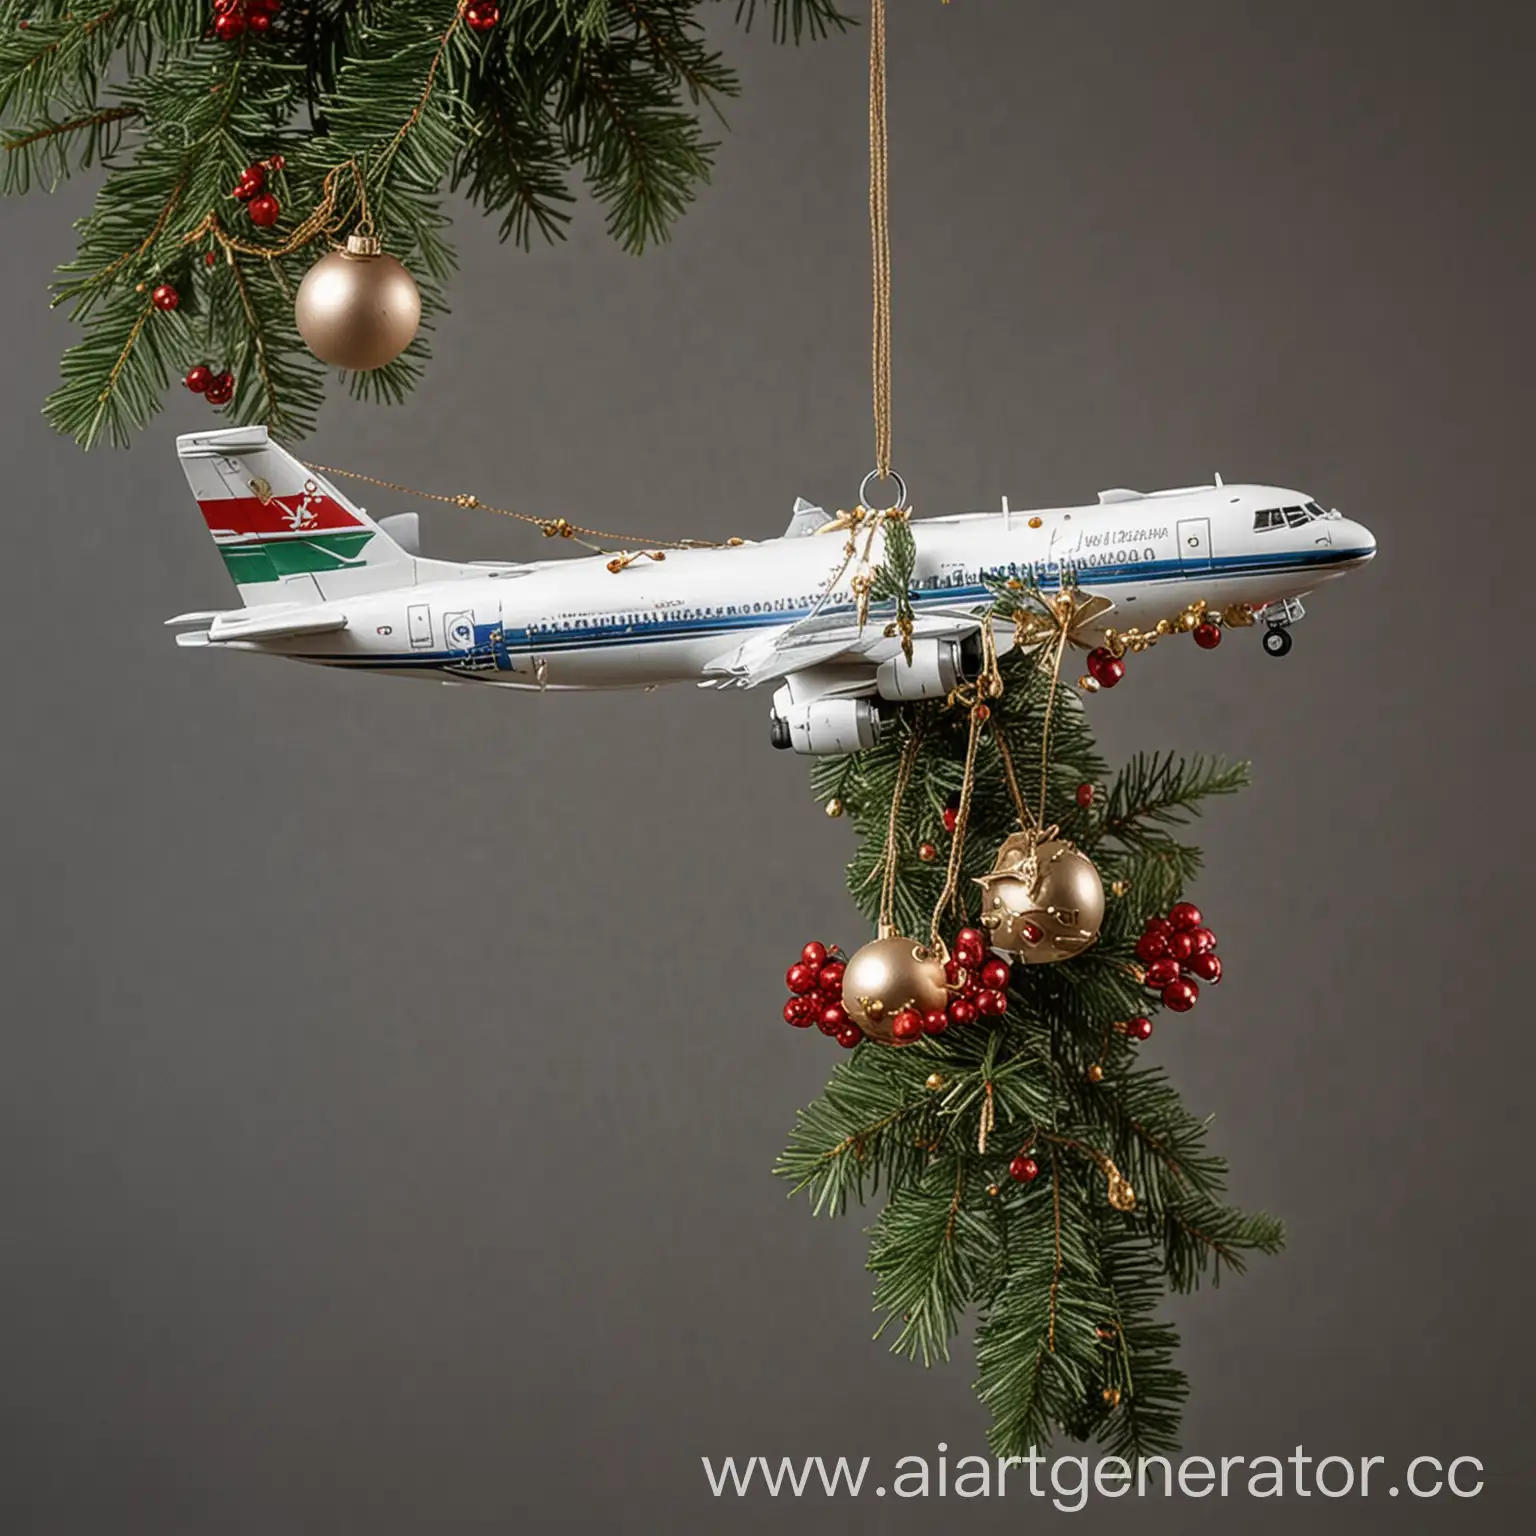 Airplane-with-Festive-Christmas-Decorations